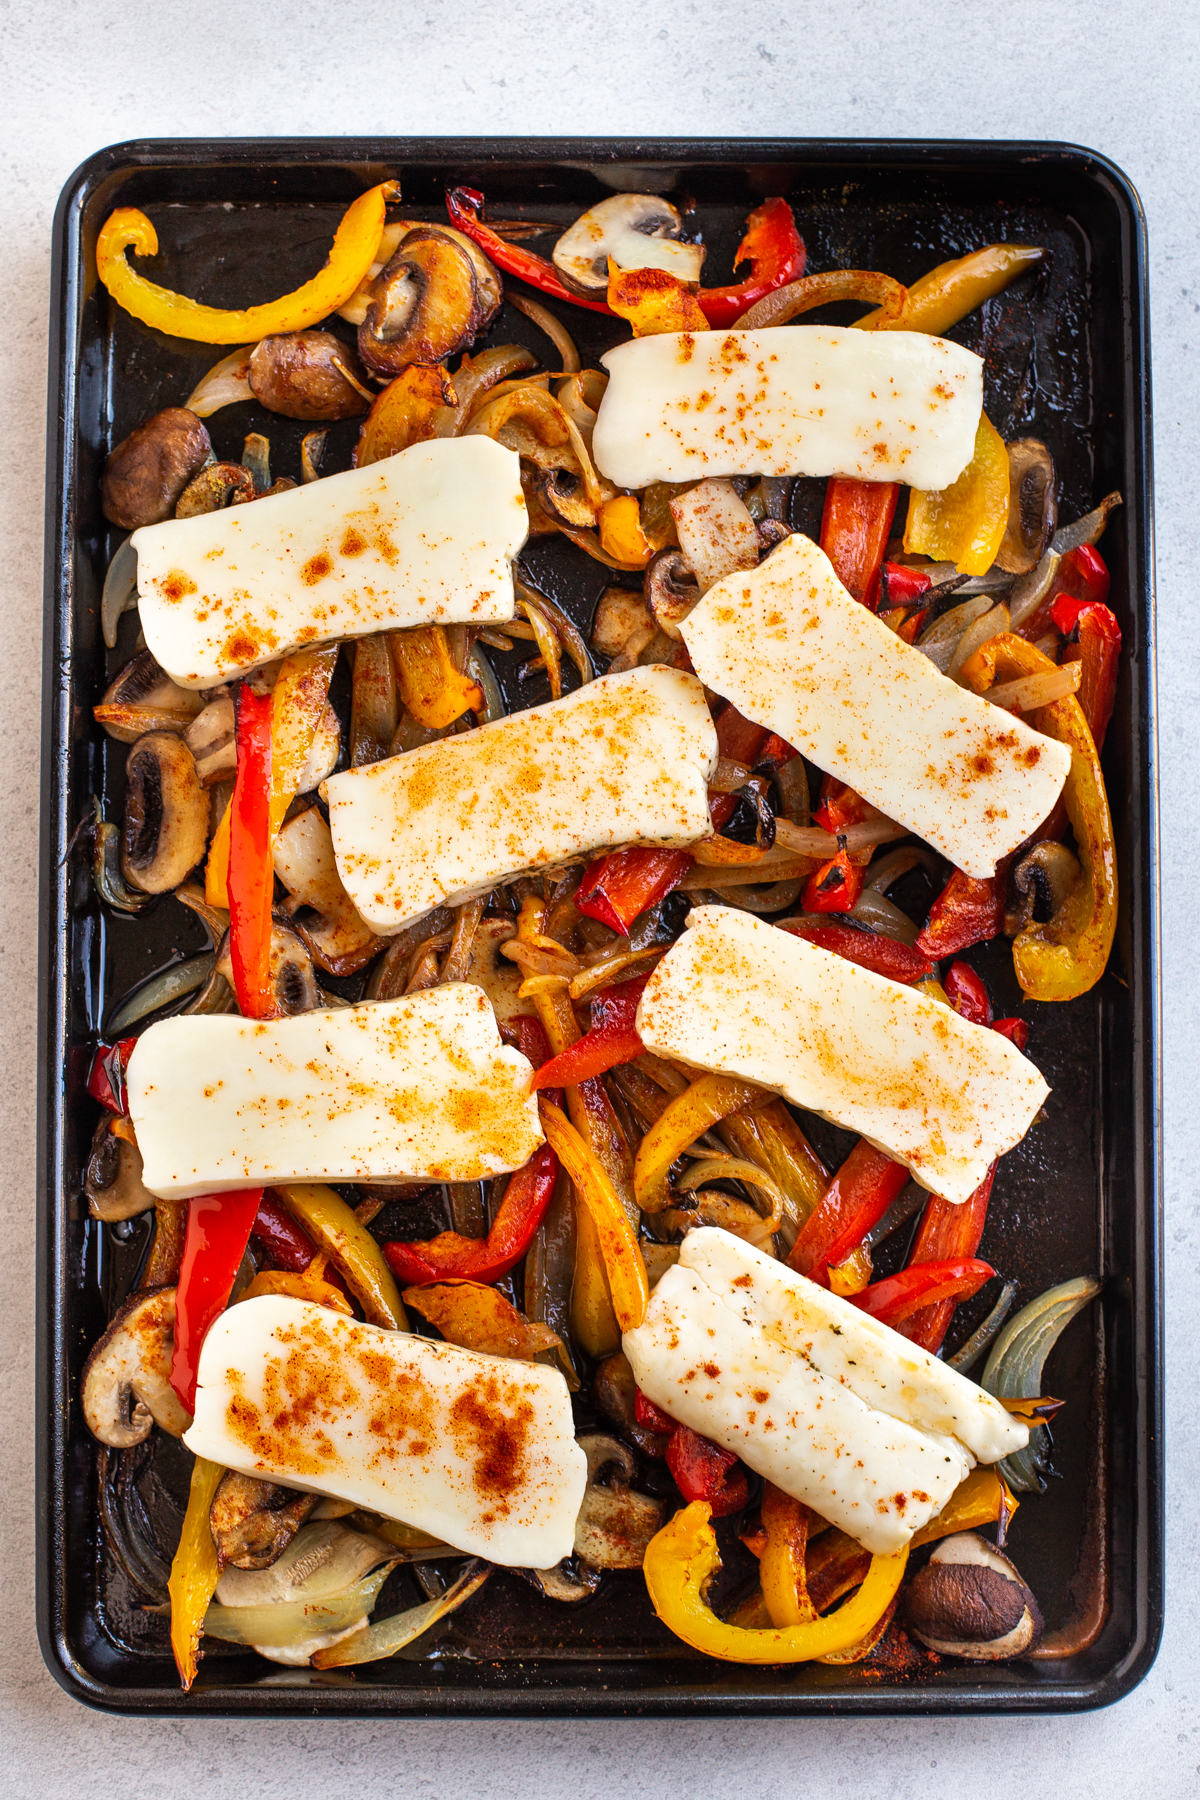 Roasted vegetables on a baking tray, topped with sliced halloumi cheese.